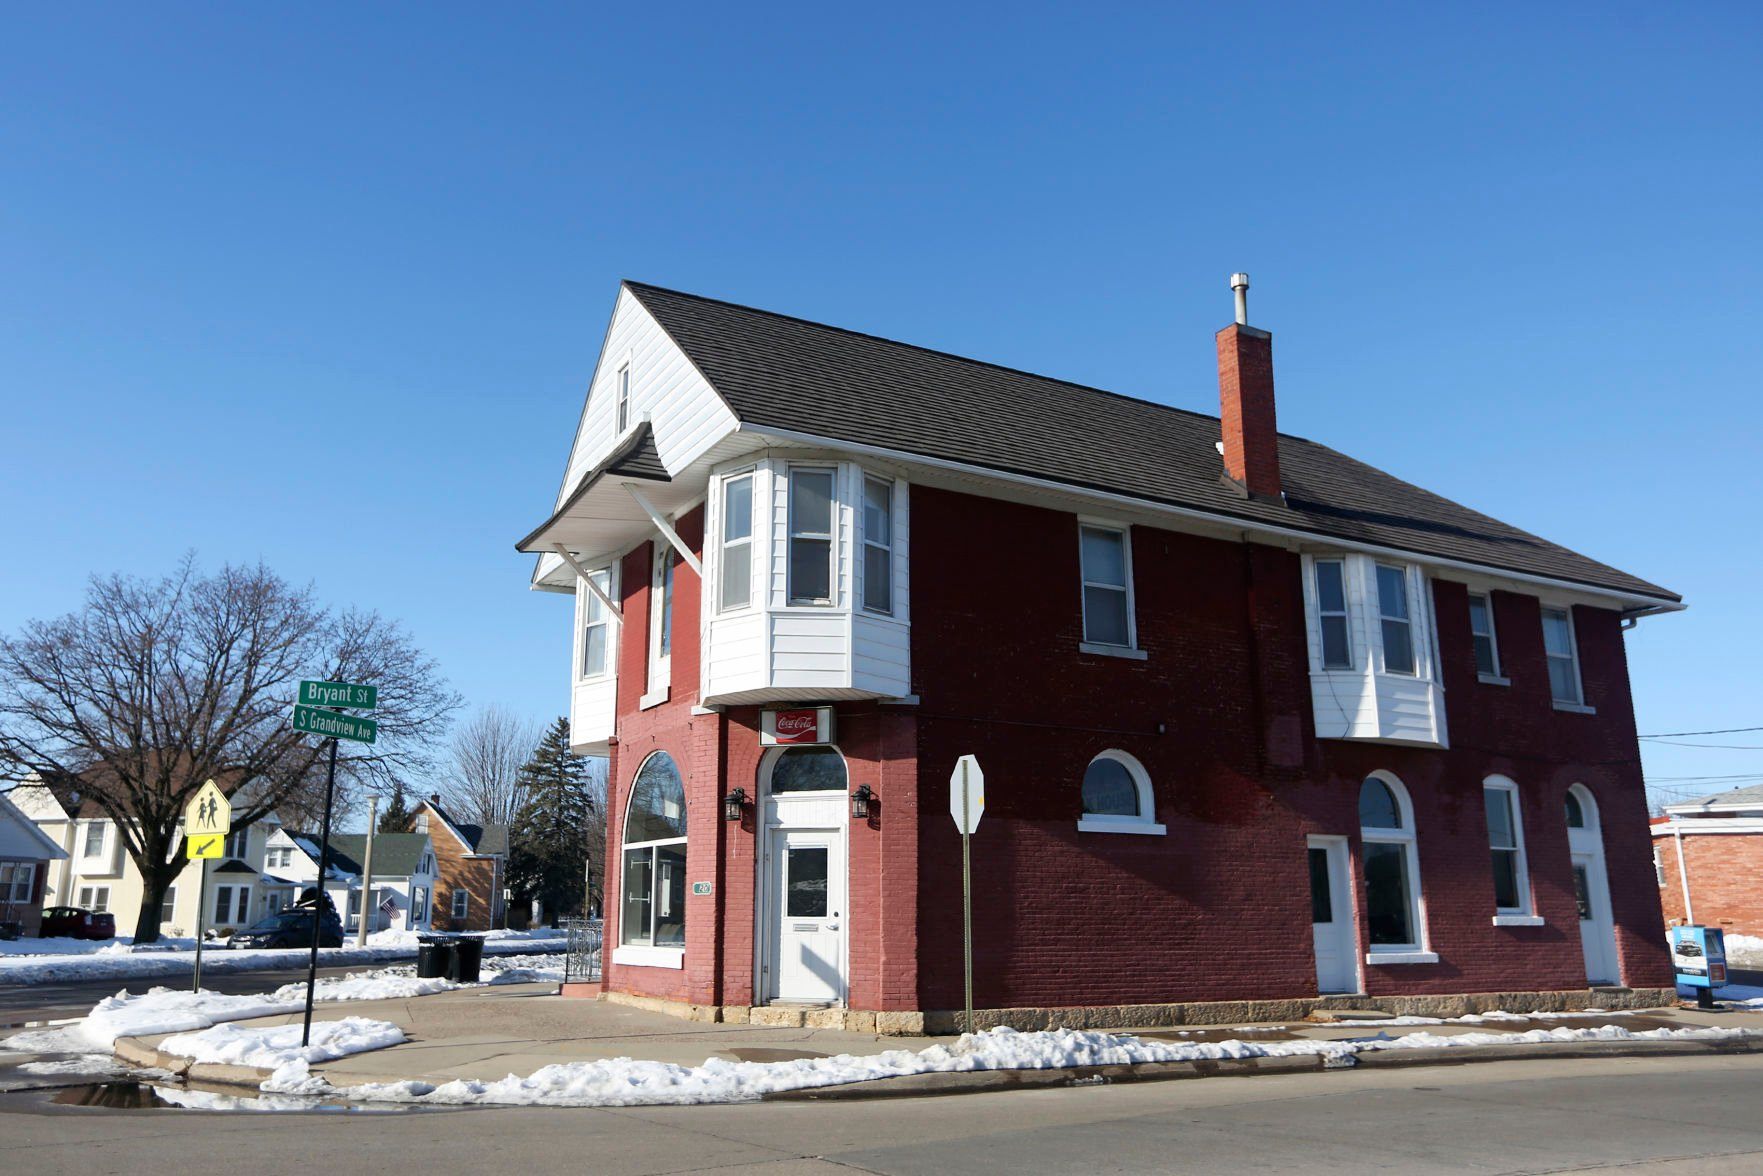 The building commonly known as the "Milk House" on South Grandview Avenue in Dubuque on Tuesday, Jan. 12, 2021.    PHOTO CREDIT: NICKI KOHL